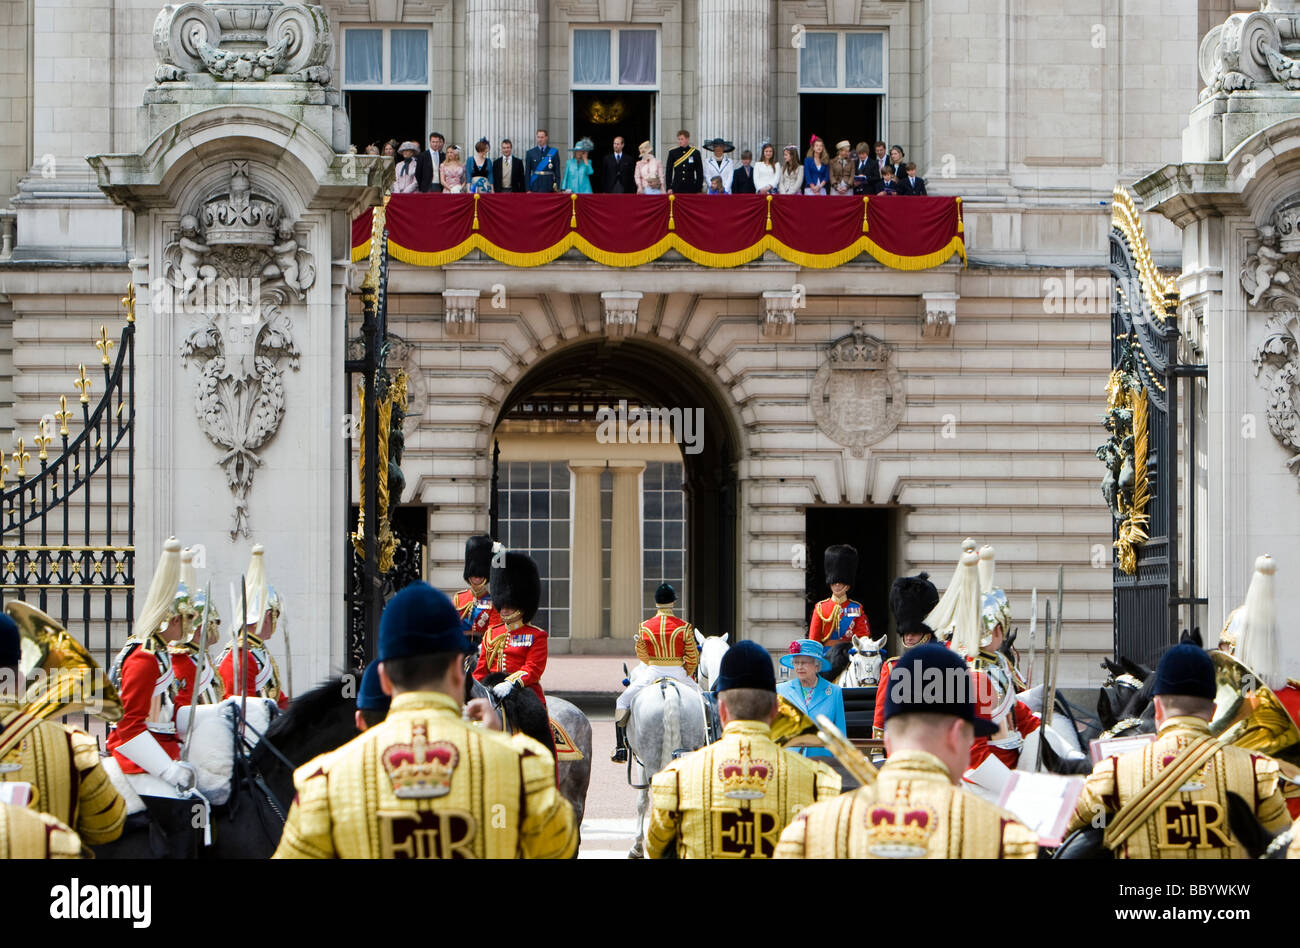 HM Queen Elizabeth II celebrates her official birthday with the Trooping of the Colours ceremony at Buckingham Palace Stock Photo